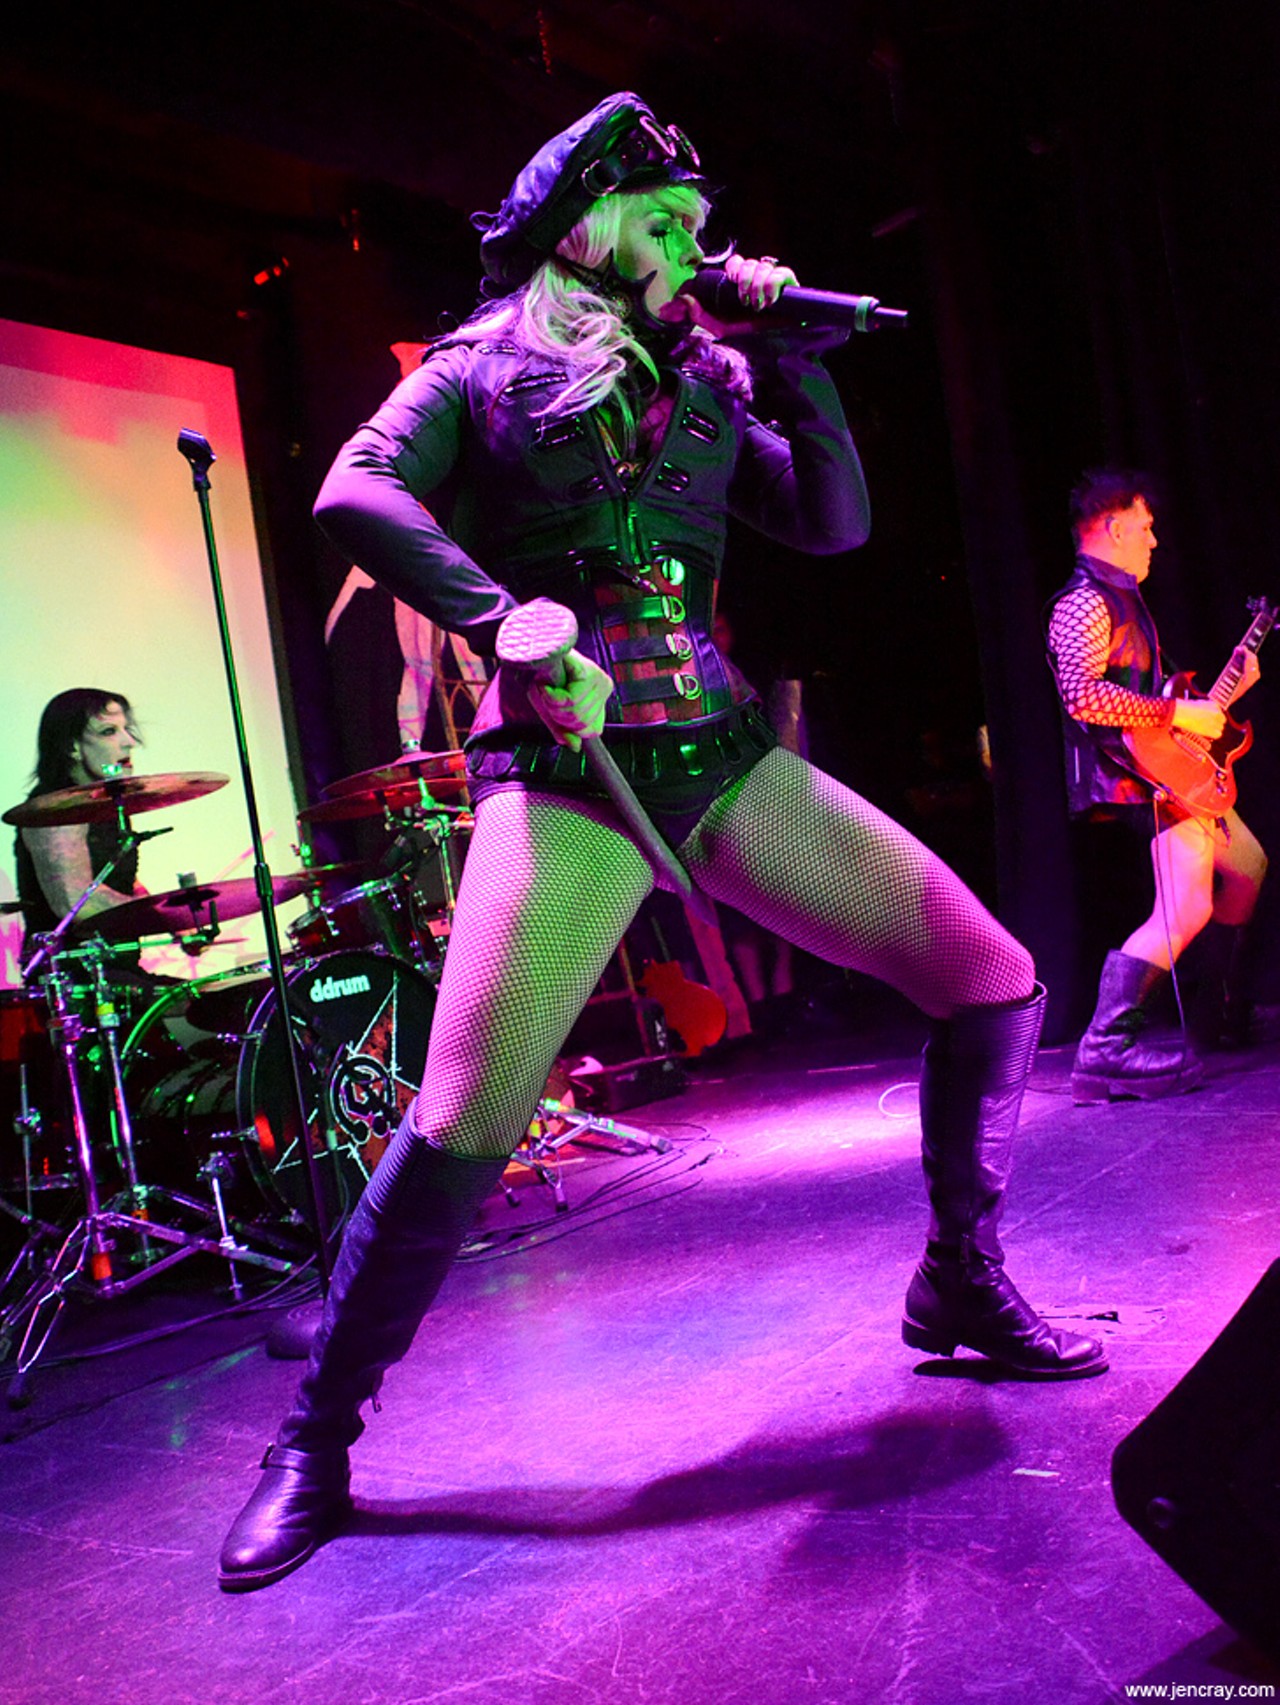 Photos from Genitorturers, Lydia Lunch and Abbey Death at the Abbey